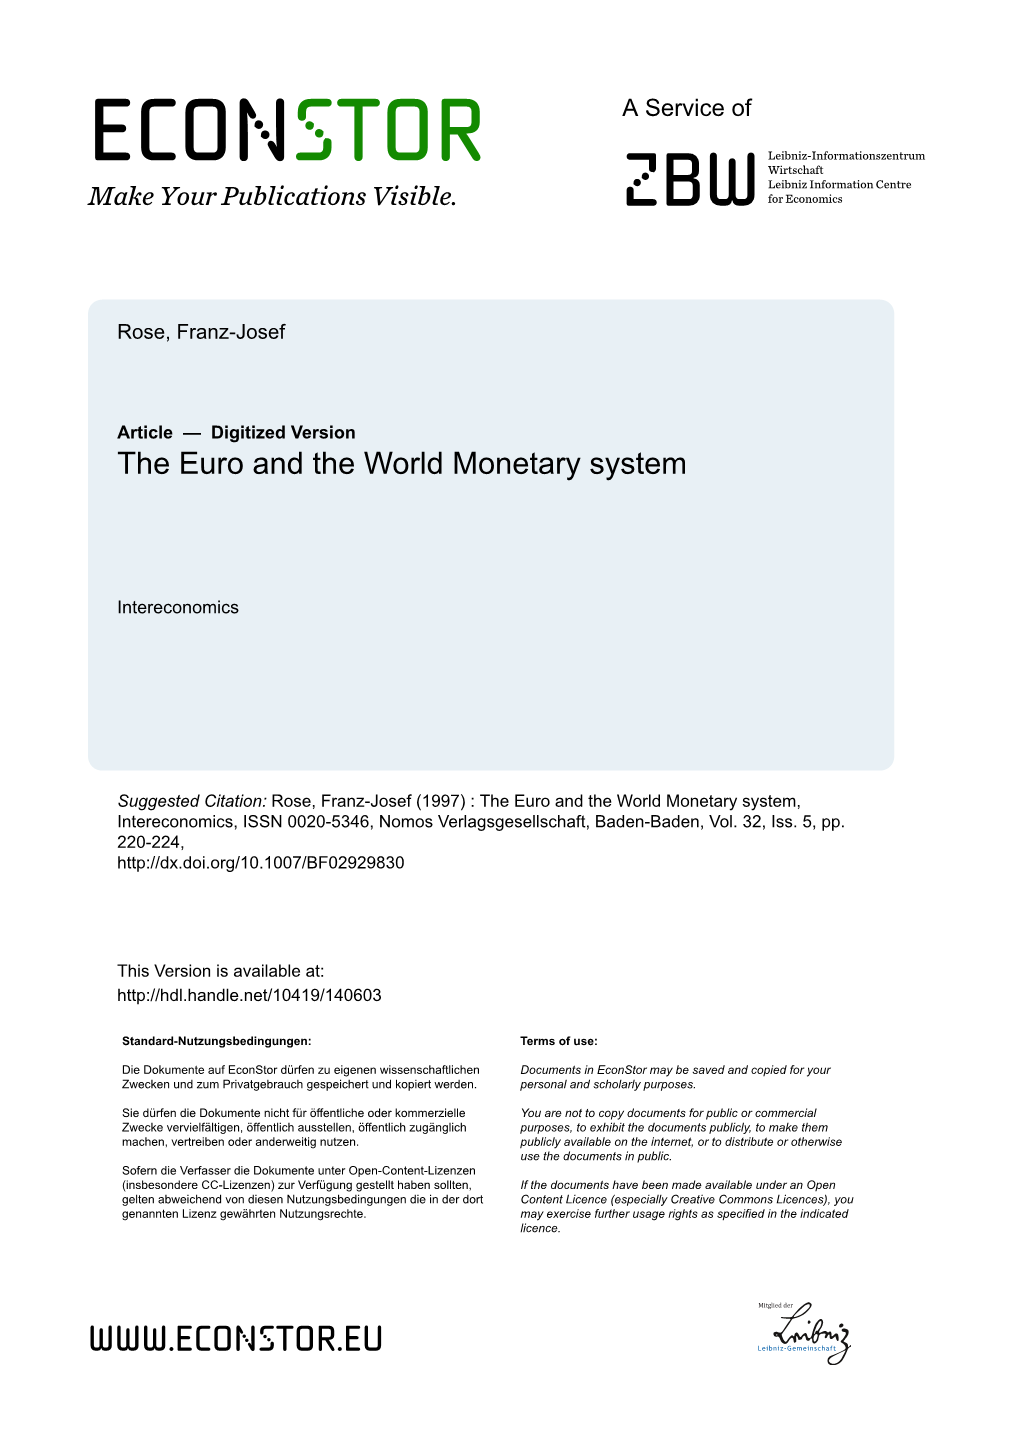 The Euro and the World Monetary System